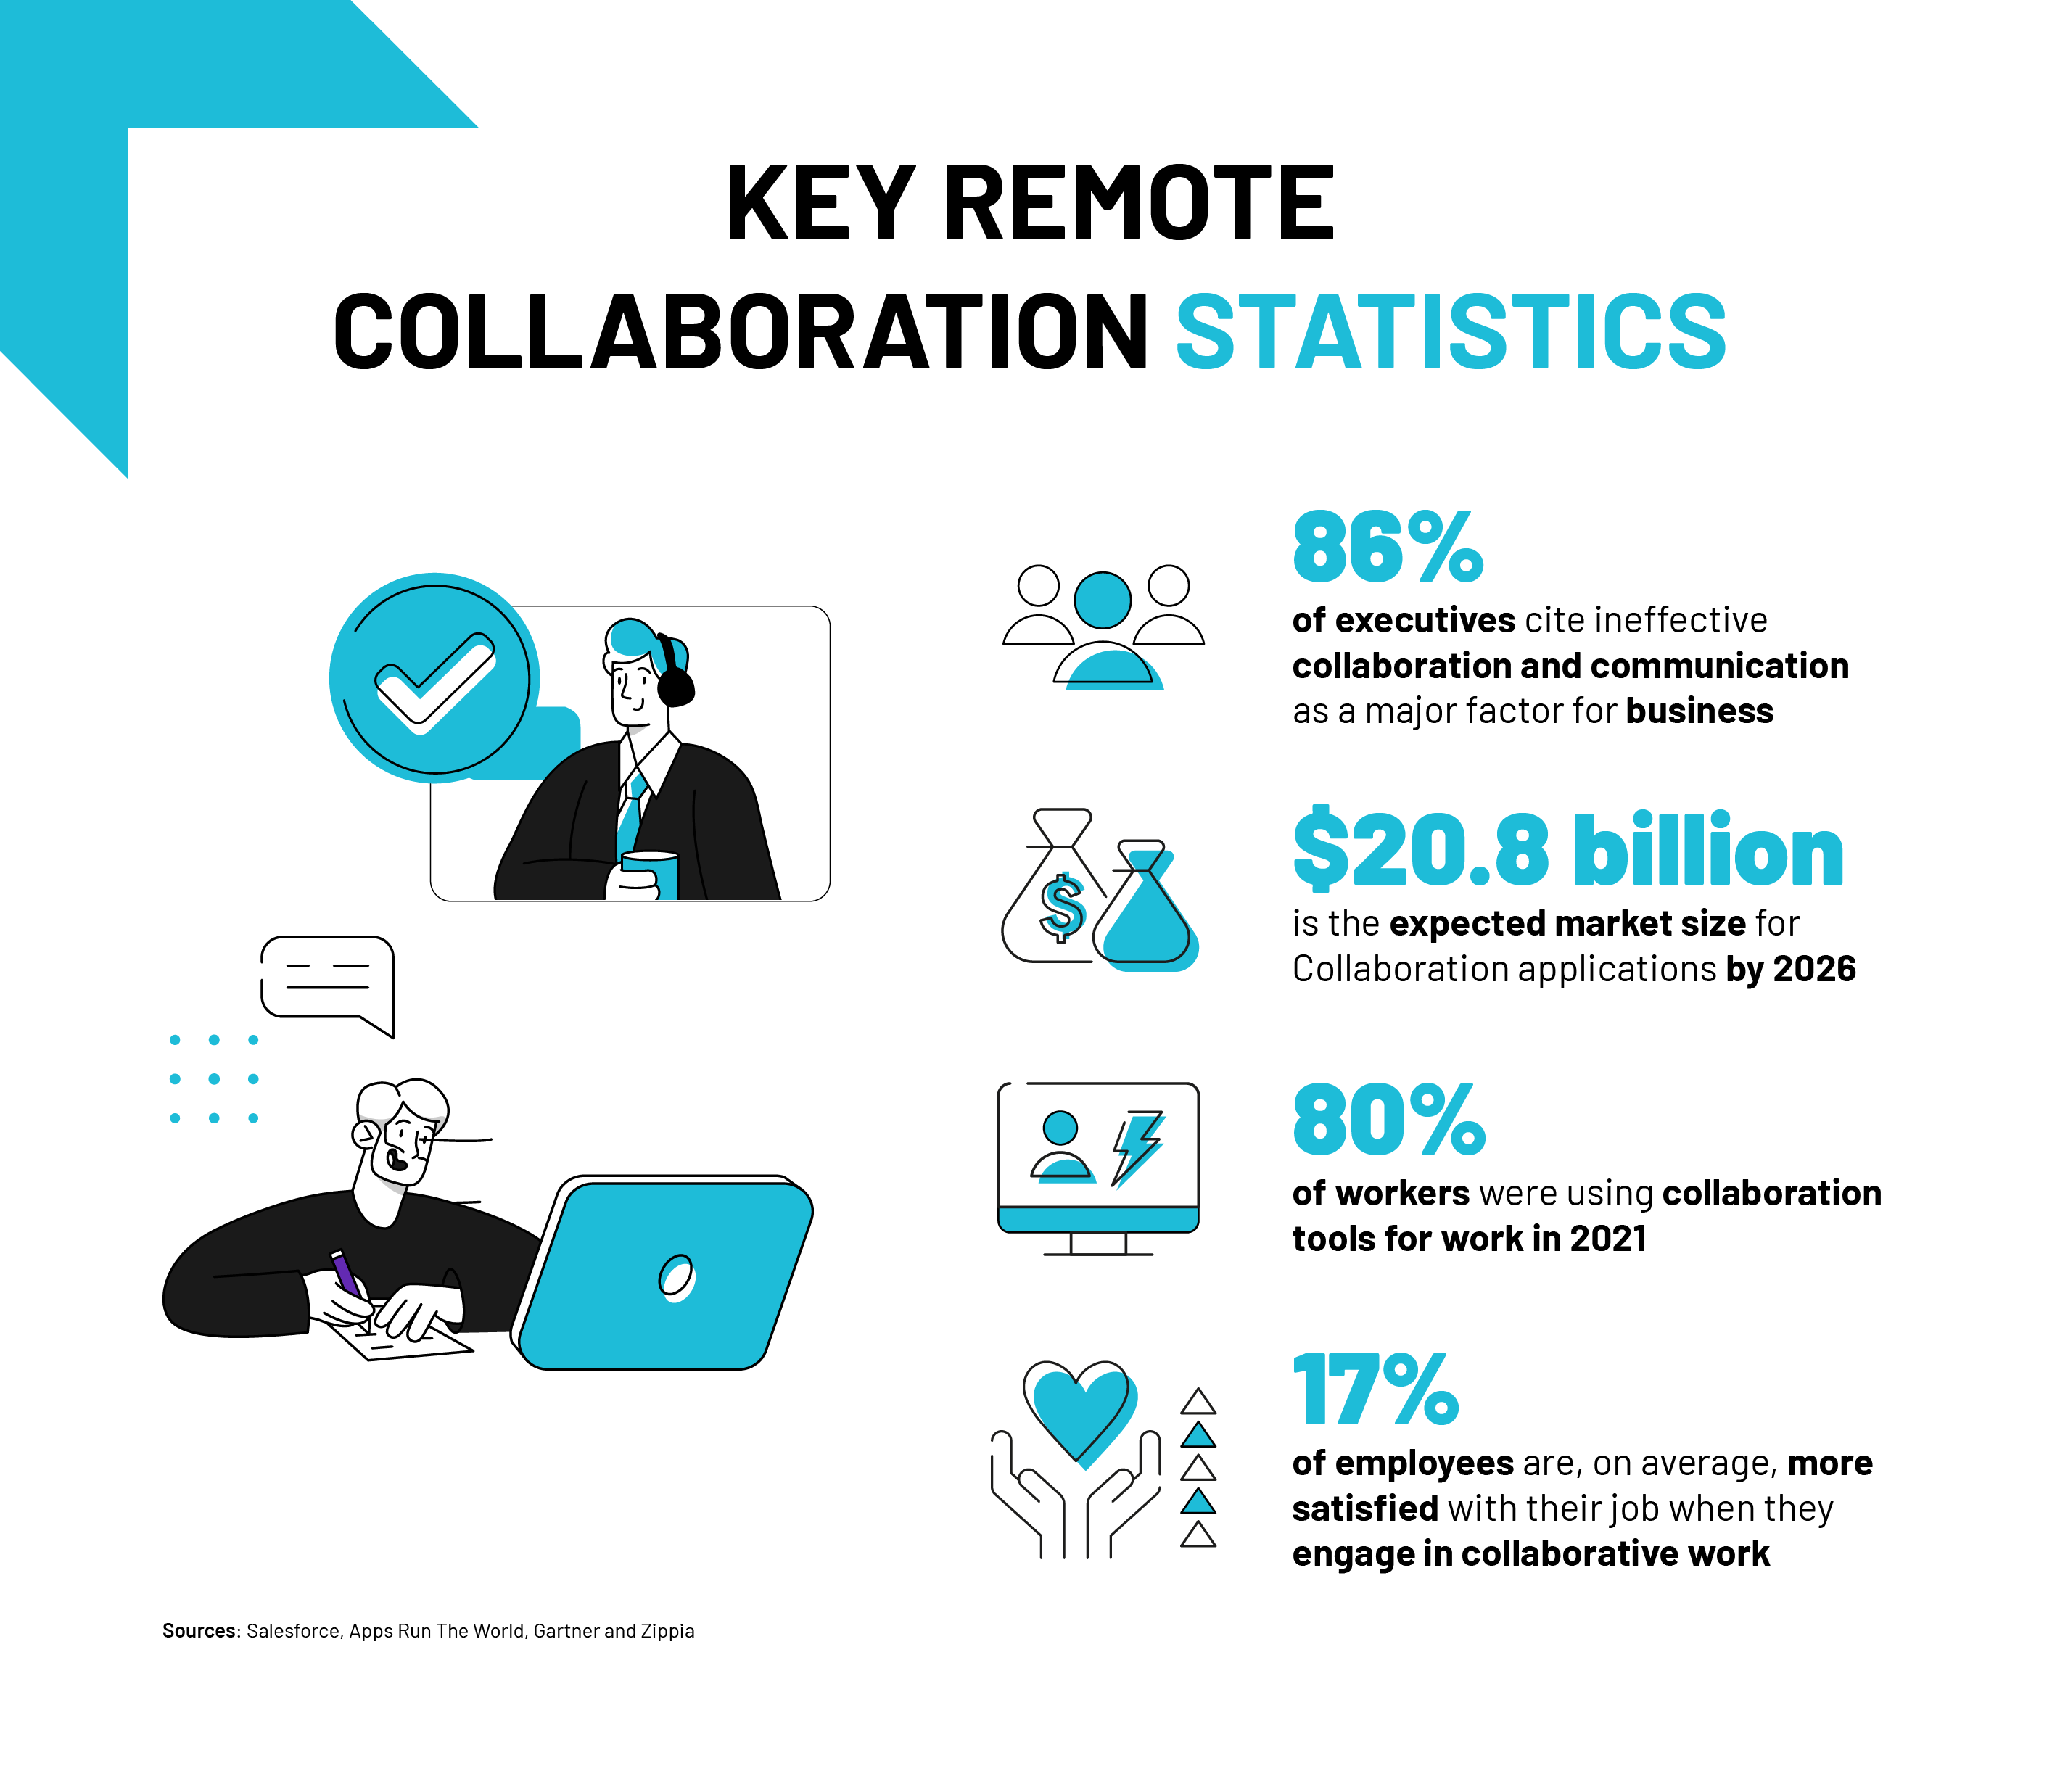 Tech.co infographic showing remote collaboration statistics